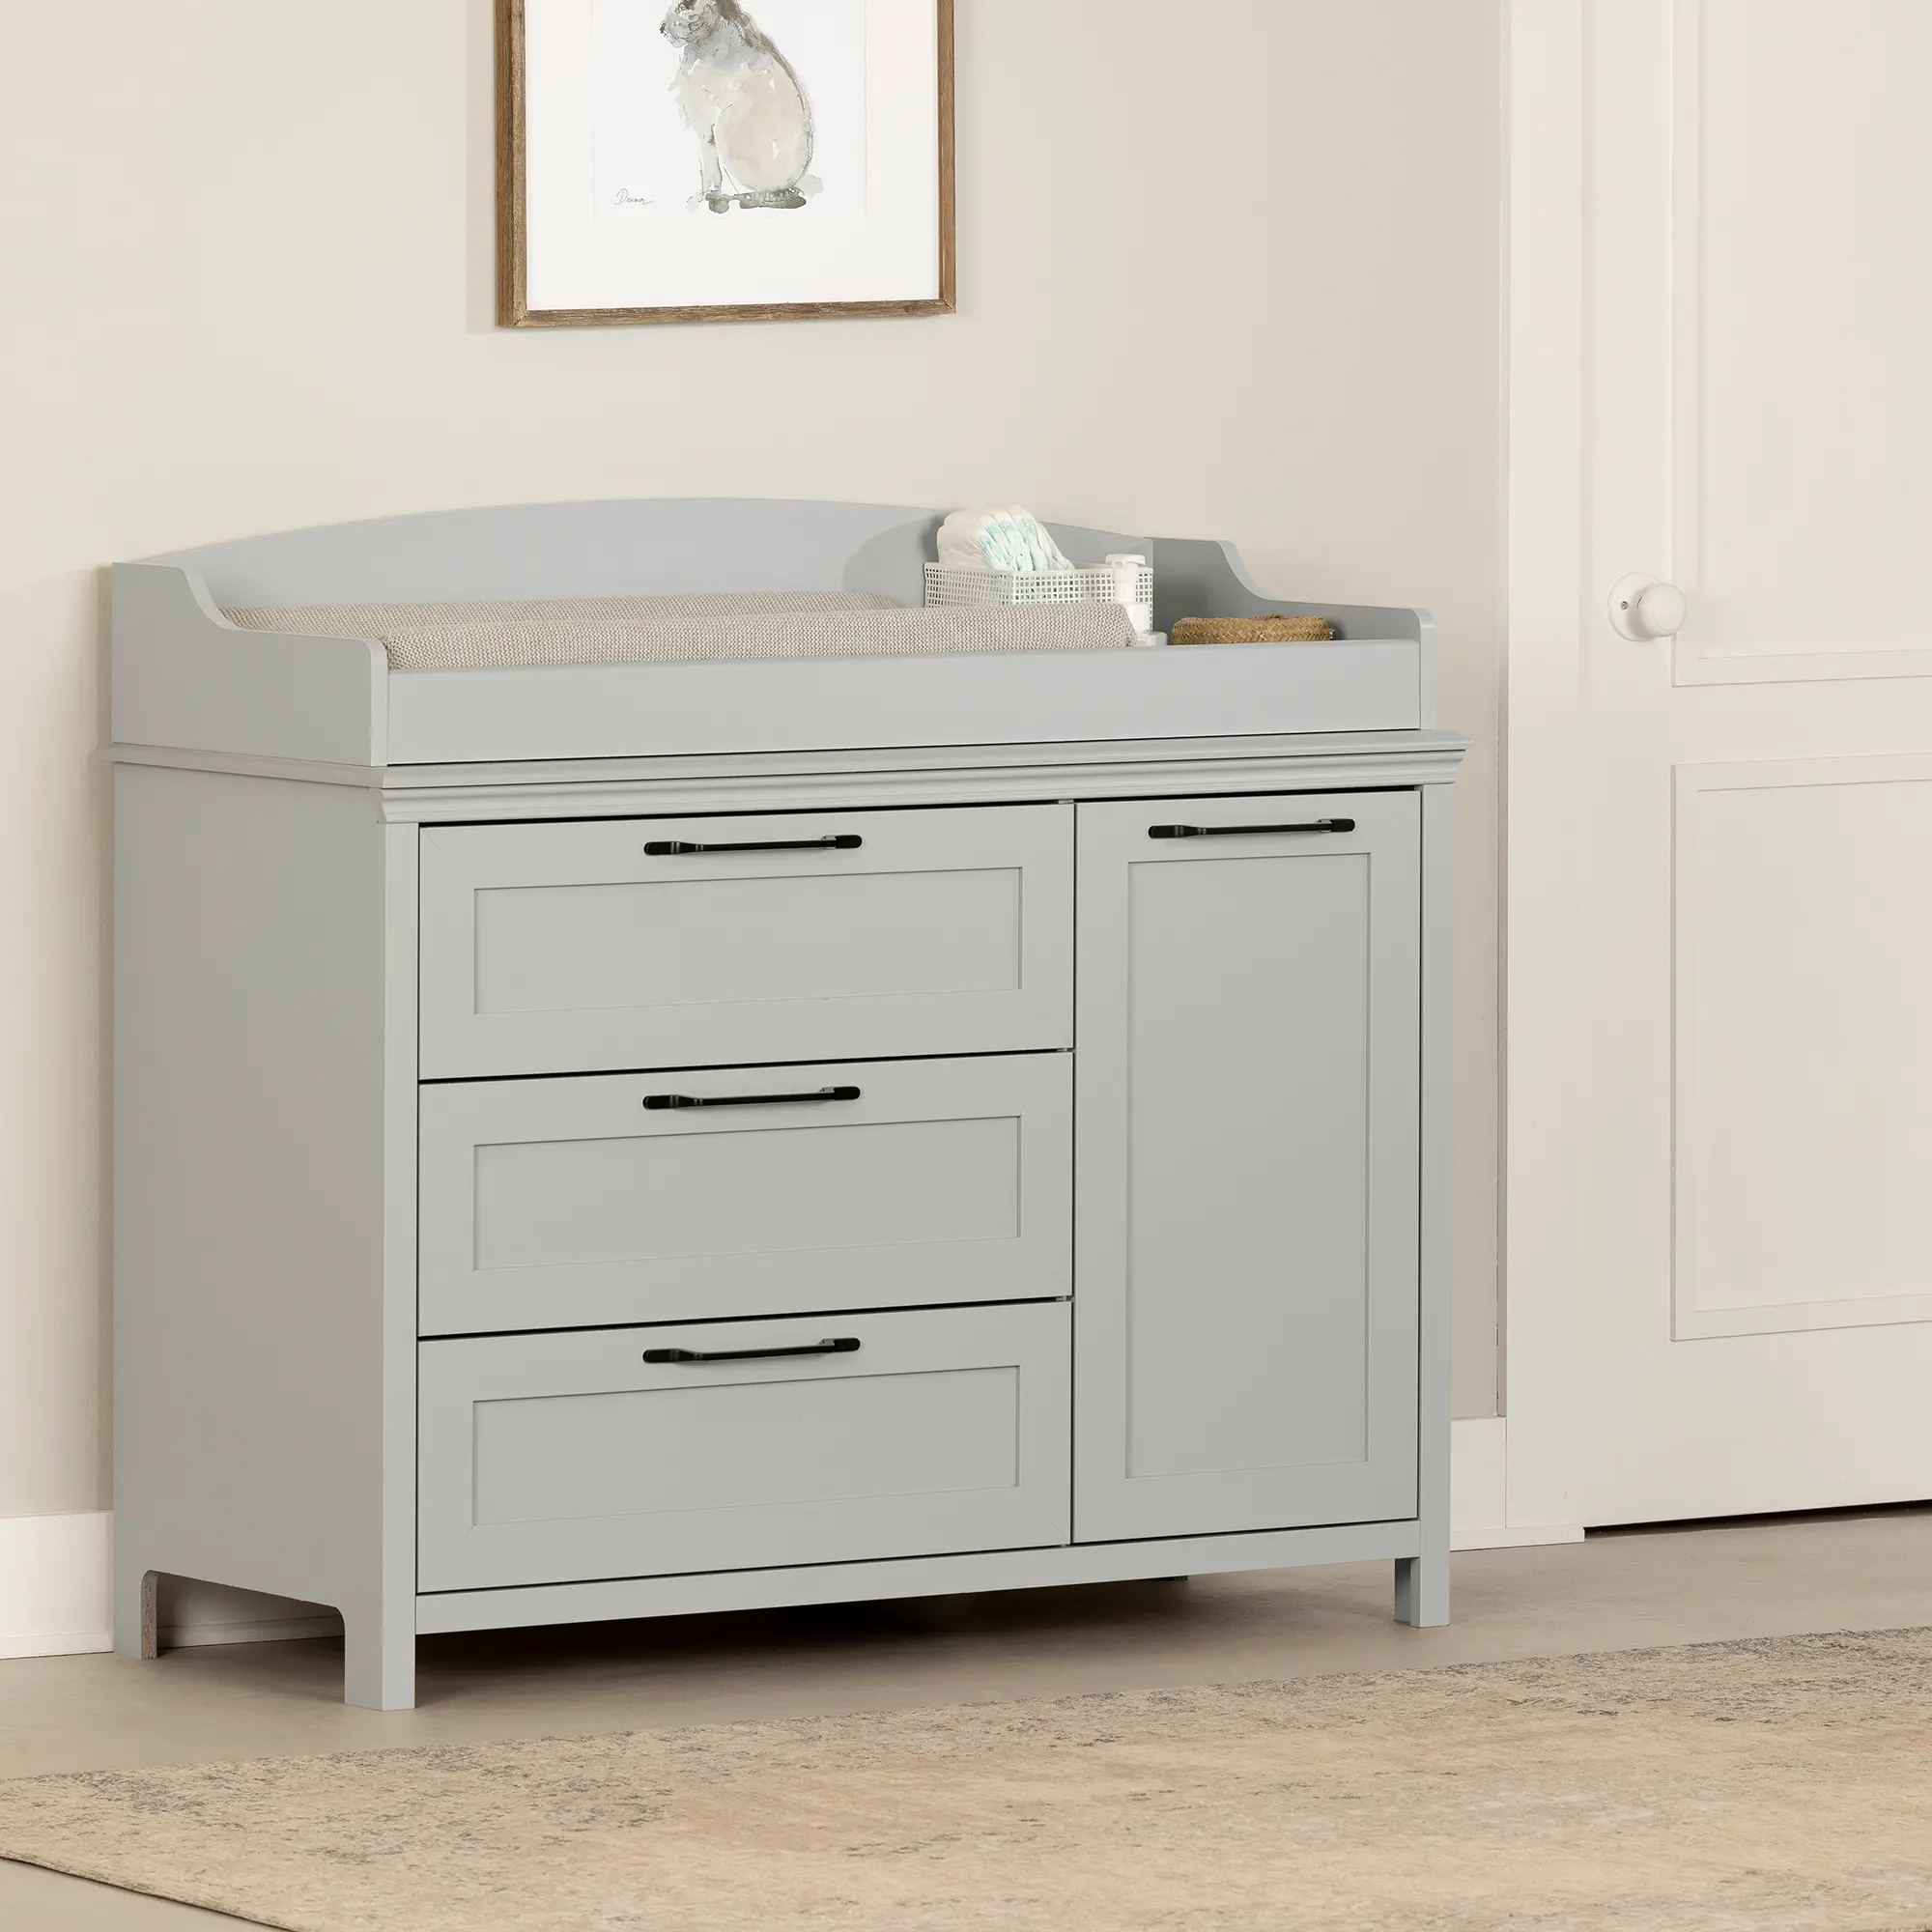 14110 Daisie Gray Changing Table - South Shore sku 14110